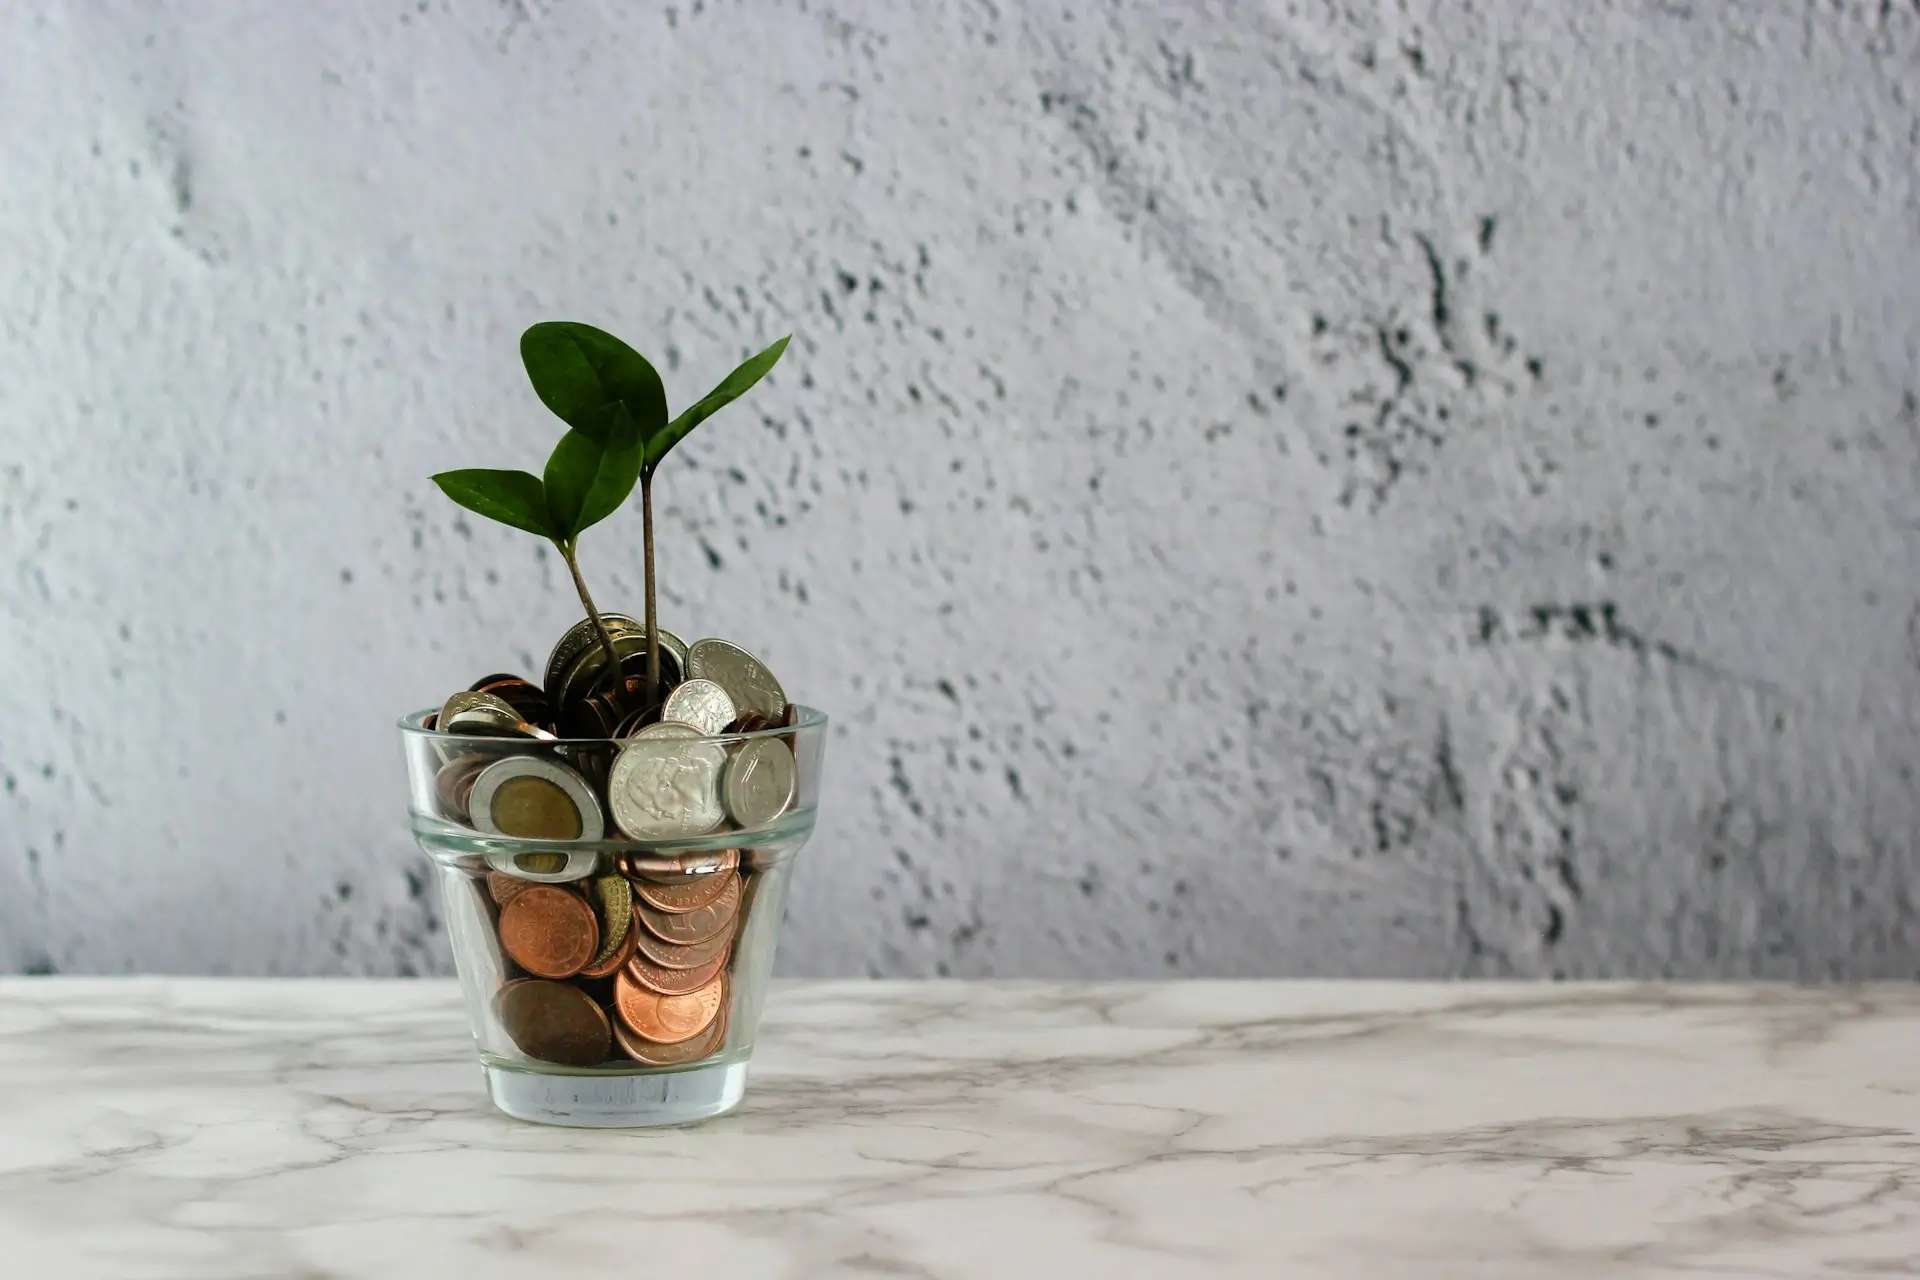 plant growing in a cup filled with coins